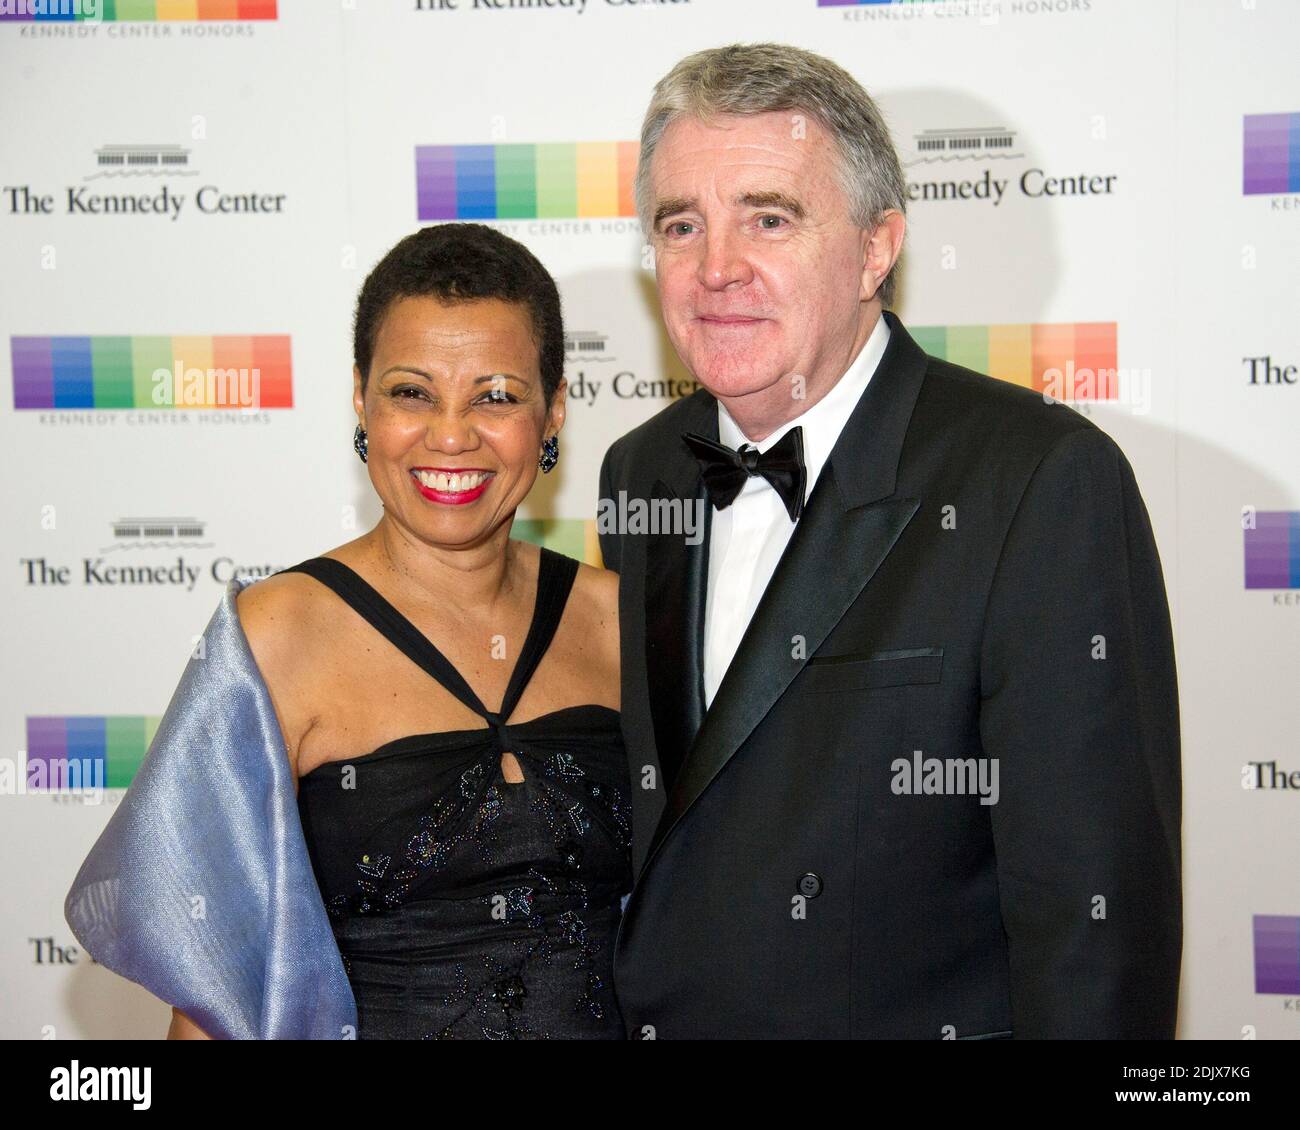 Opera singer Harolyn Blackwell and Peter Greer arrive for the formal Artist's Dinner honoring the recipients of the 39th Annual Kennedy Center Honors hosted by United States Secretary of State John F. Kerry at the U.S. Department of State in Washington, D.C. on Saturday, December 3, 2016. The 2016 honorees are: Argentine pianist Martha Argerich; rock band the Eagles; screen and stage actor Al Pacino; gospel and blues singer Mavis Staples; and musician James Taylor. Photo by Ron Sachs /Pool via CNP/ABACAPRESS.COM Stock Photo